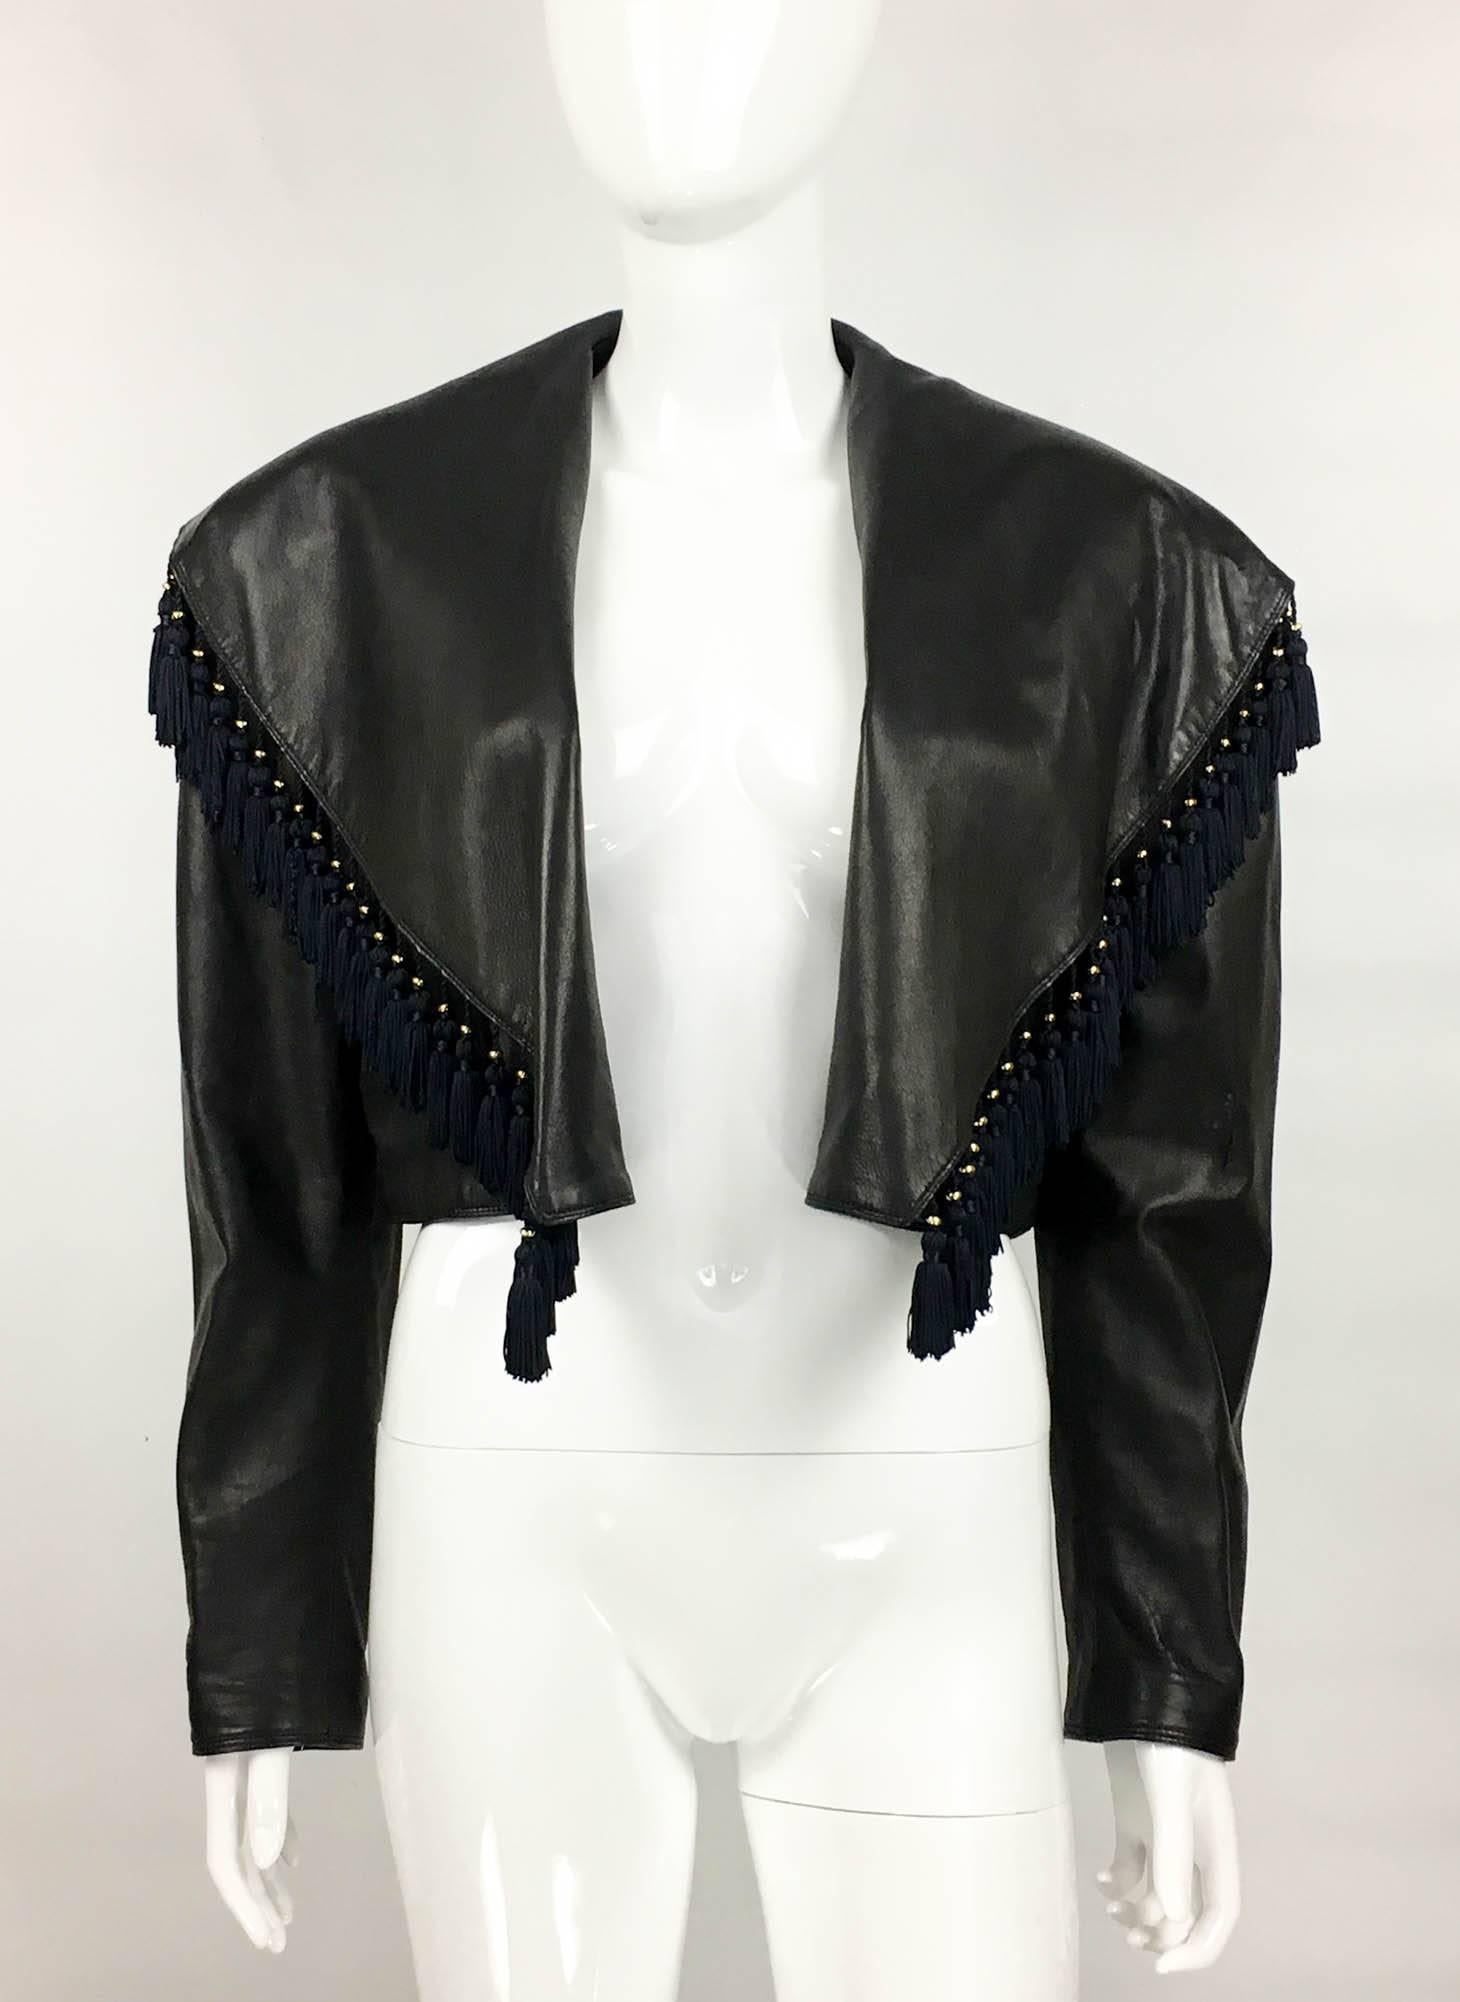 Gianni Versace Black Leather Jacket With Tassel Embellished Collar, 1980s In Excellent Condition In London, Chelsea